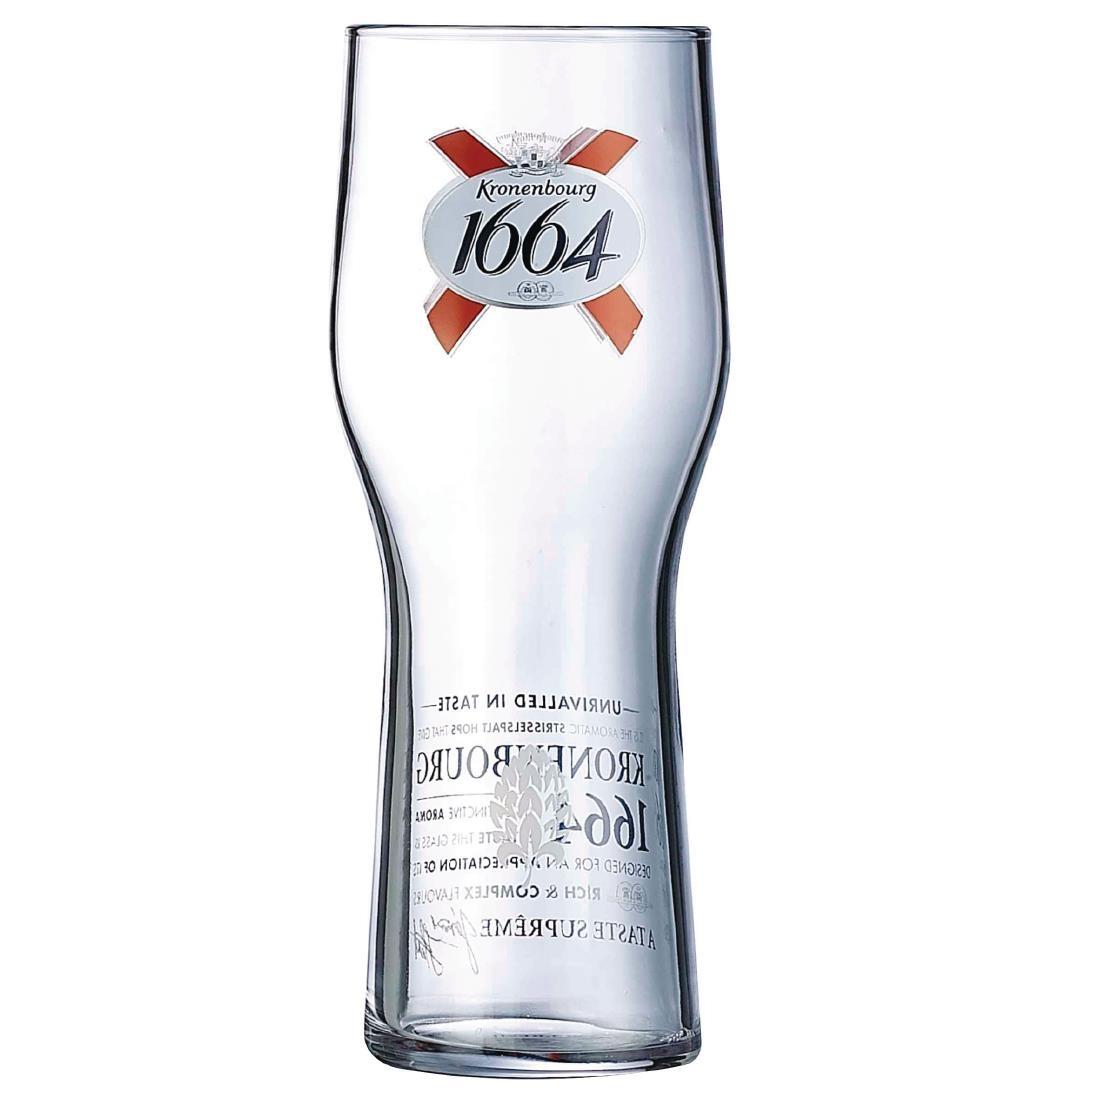 Arcoroc Kronenbourg 1664 Beer Glasses 570ml CE Marked (Pack of 24) - GG894  - 1